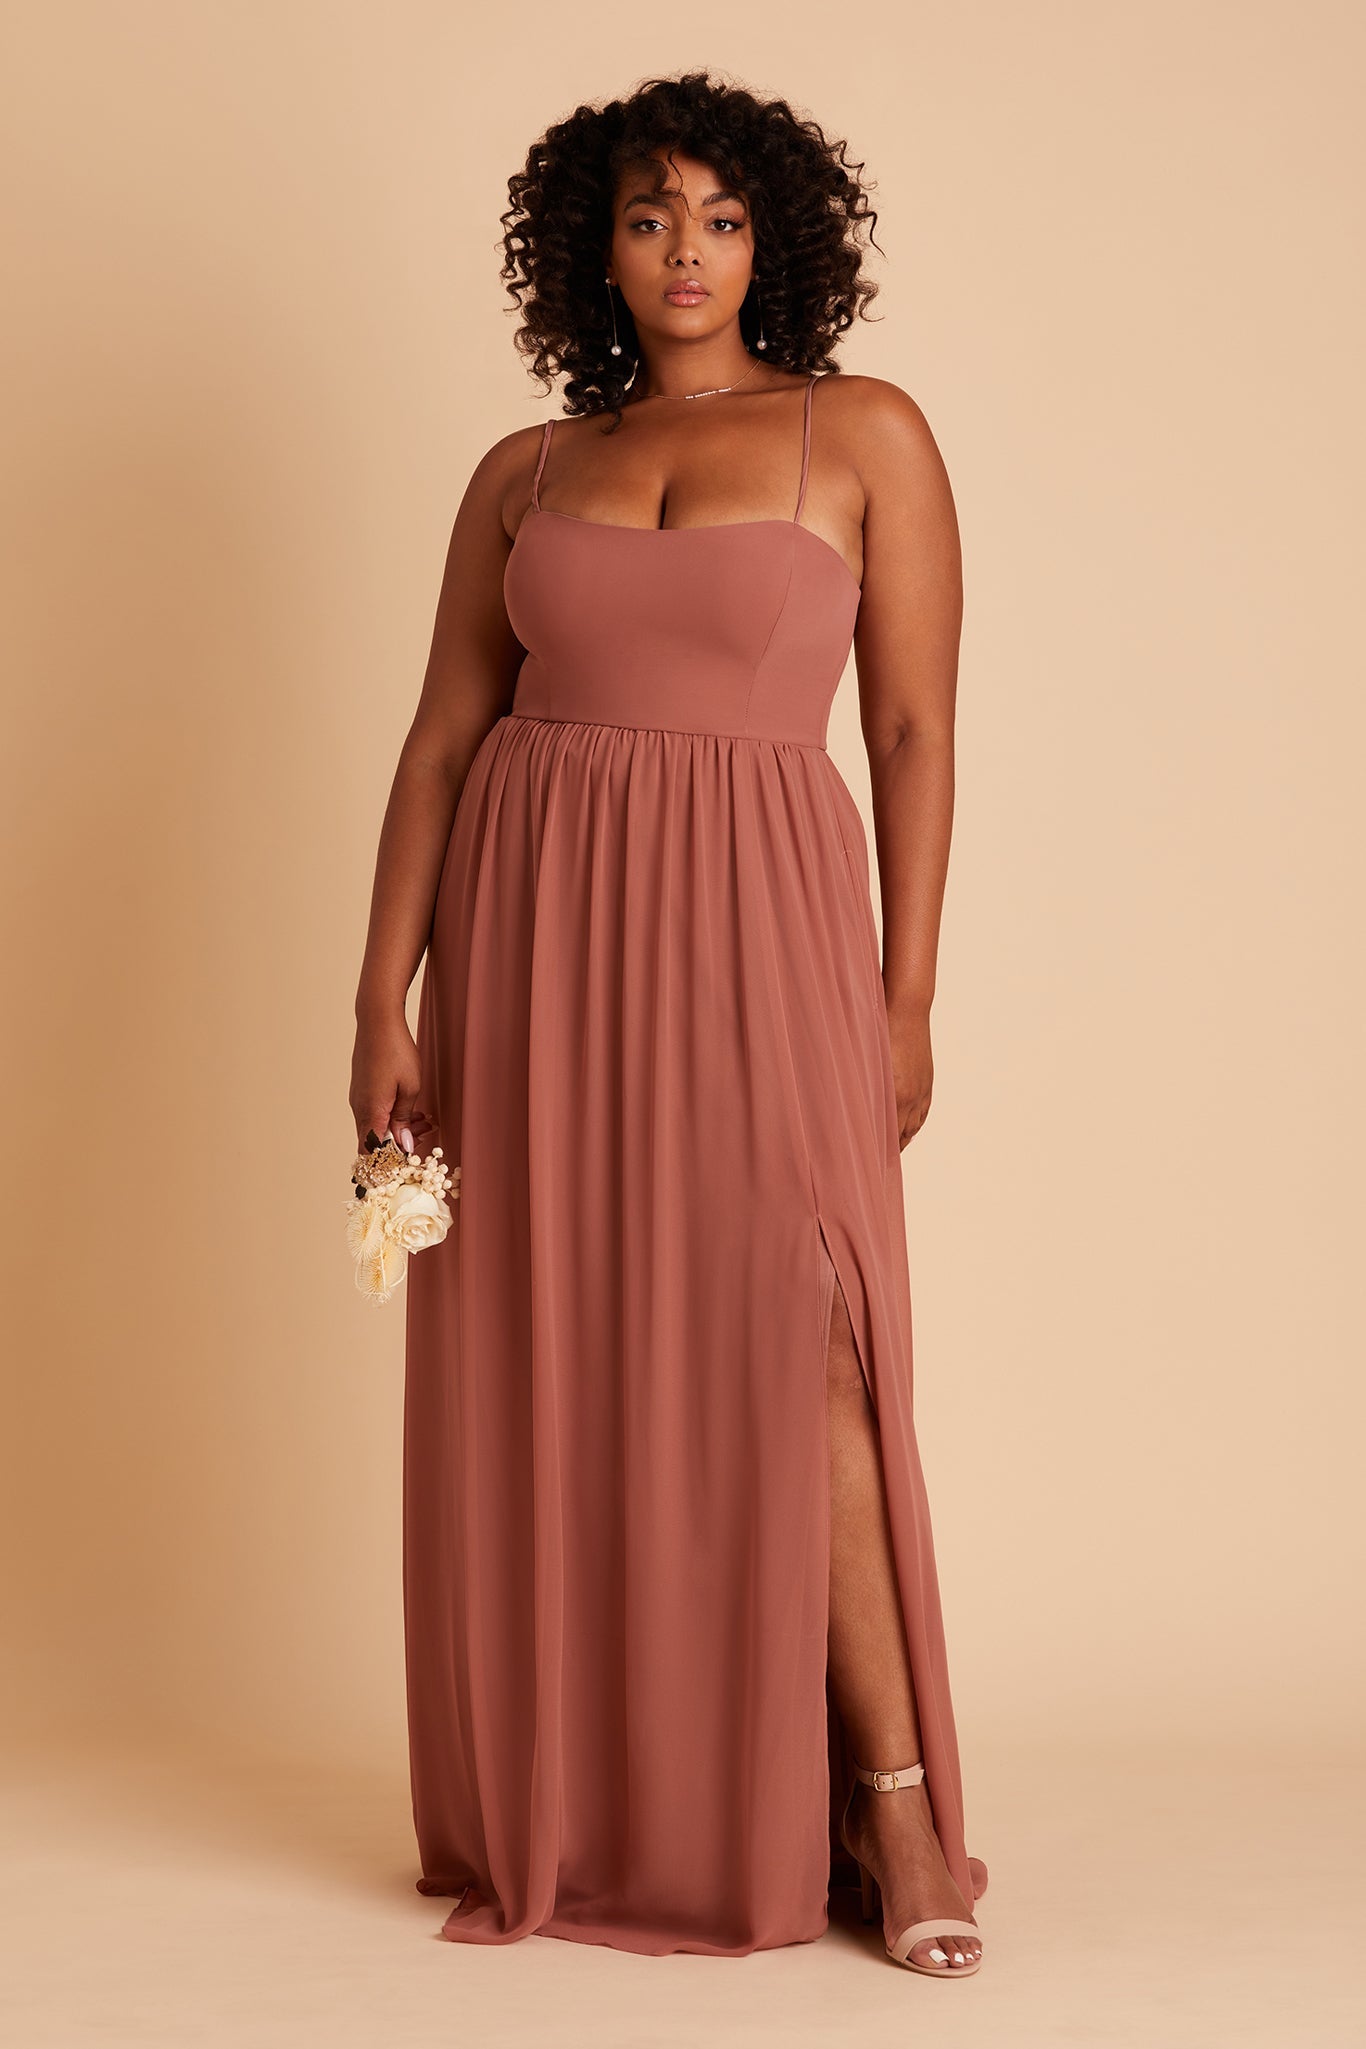 August plus size bridesmaid dress with slit in desert rose chiffon by Birdy Grey, front view